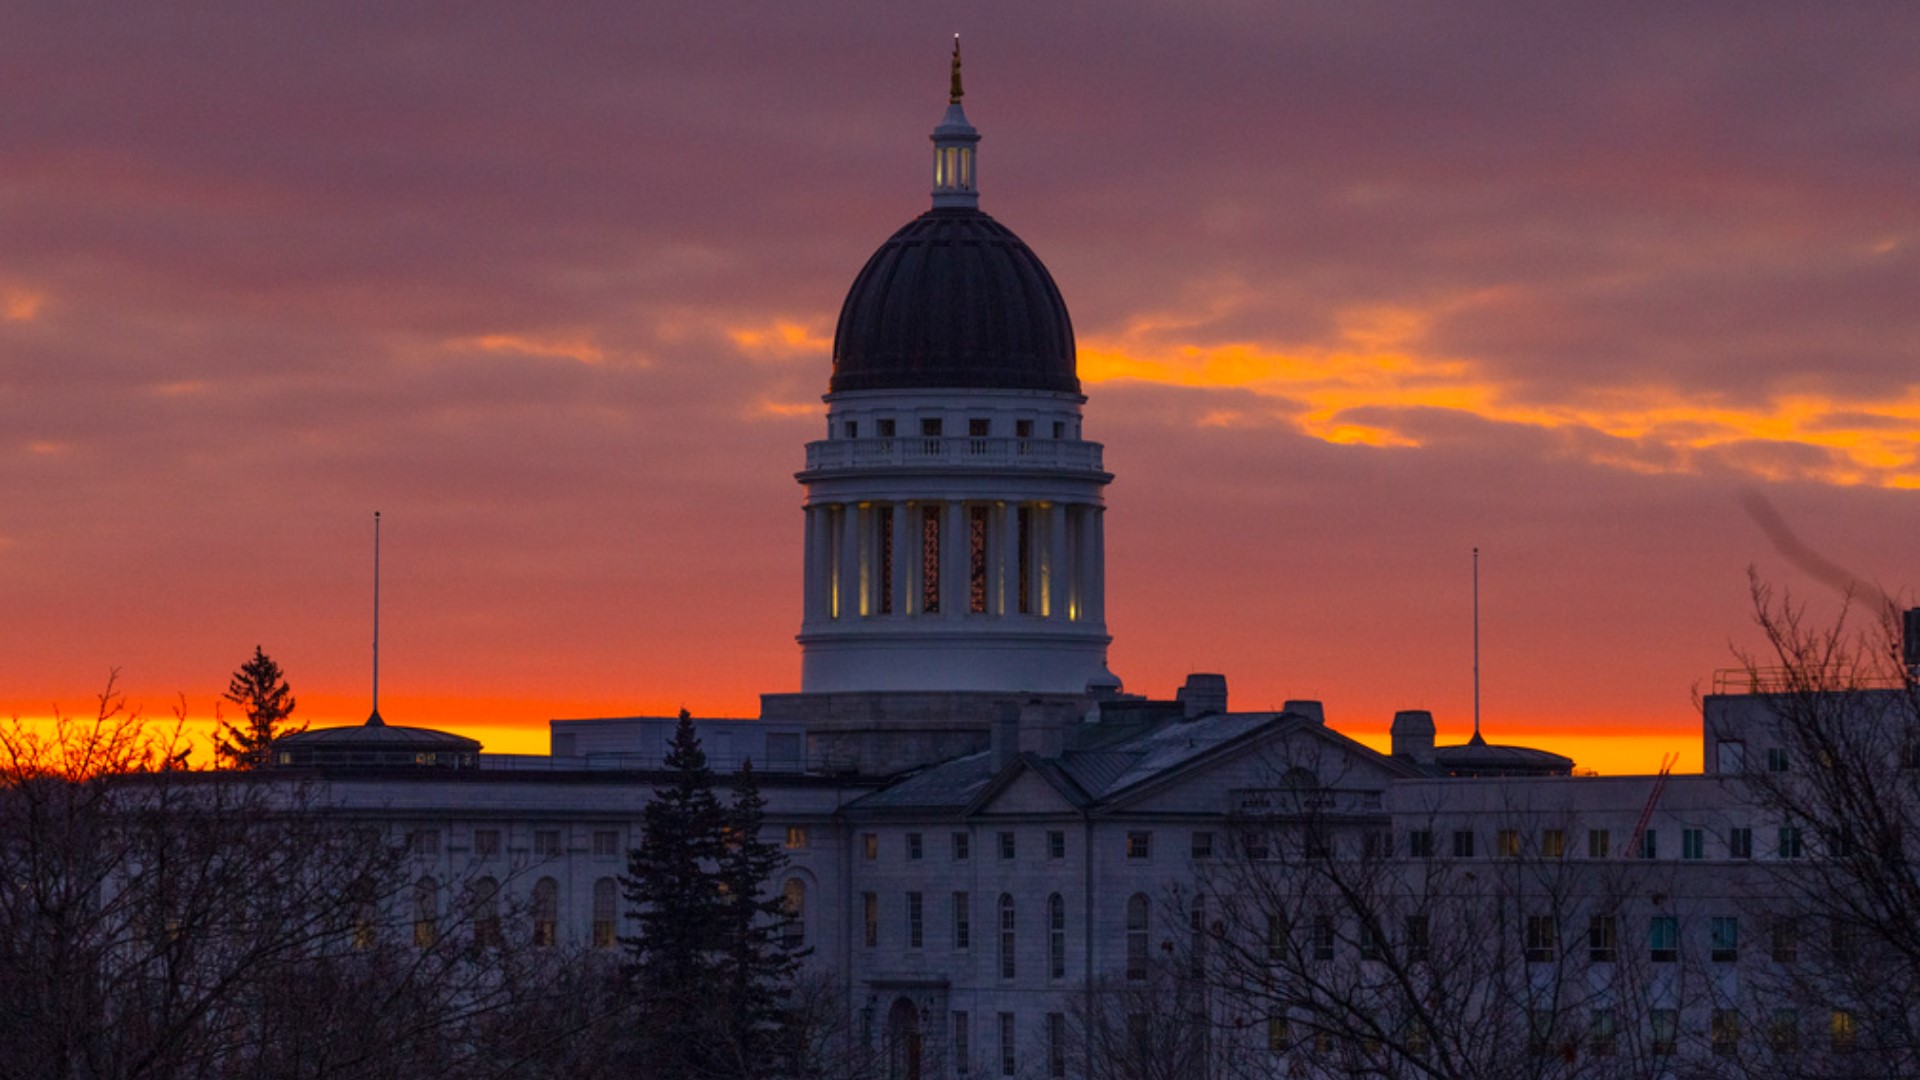 With tomorrow's deadline looming, lawmakers work to push through last-minute bills in the Maine Legislature.